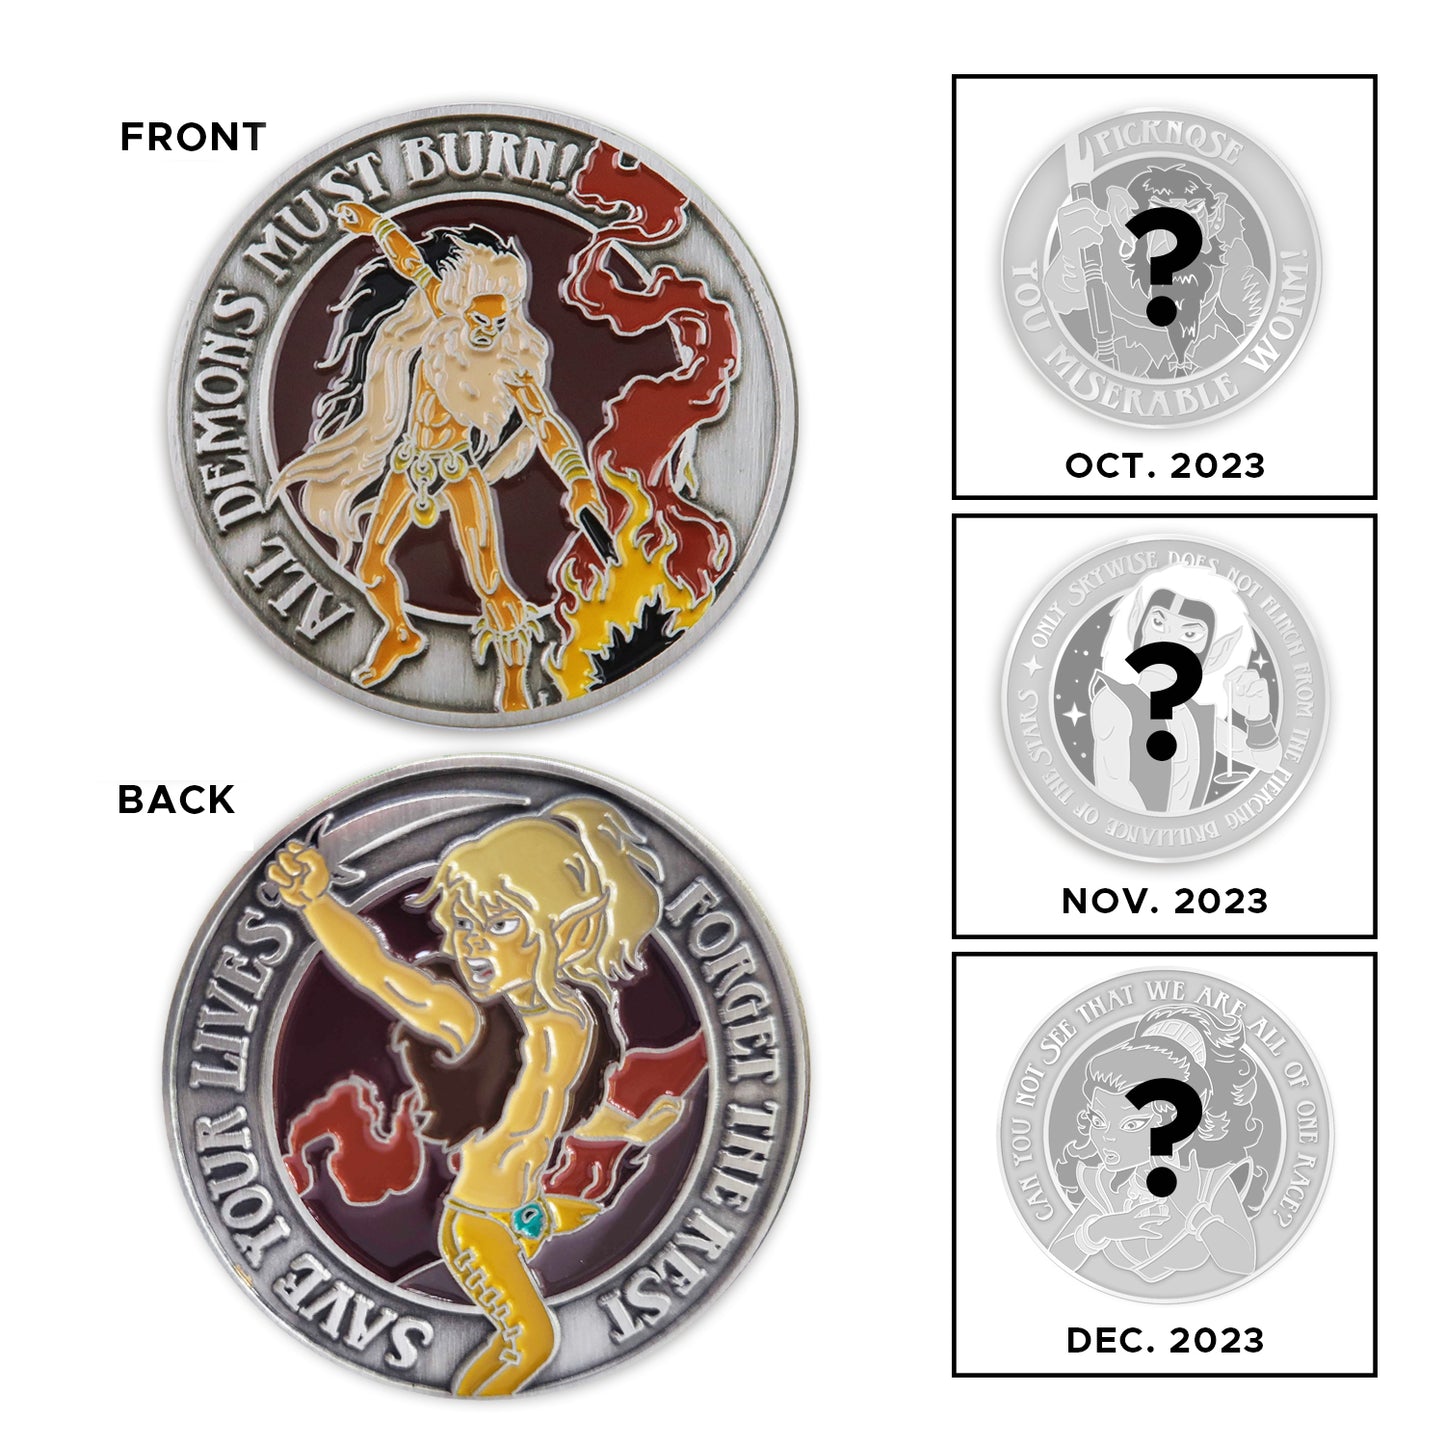 Load image into Gallery viewer, A front and back image of a brass challenge coin. On the front is a drawing of the Elfquest character Leetah. Raised text around the edge says “all demons must burn.” The back of the coin depicts the characters Nightfall and Redlance. Around the edge, raised text says “Save your lives, forget the rest.” Next to the front and back are unfinished examples of upcoming Elfquest coins, in grey, with black question marks superimposed over each.
